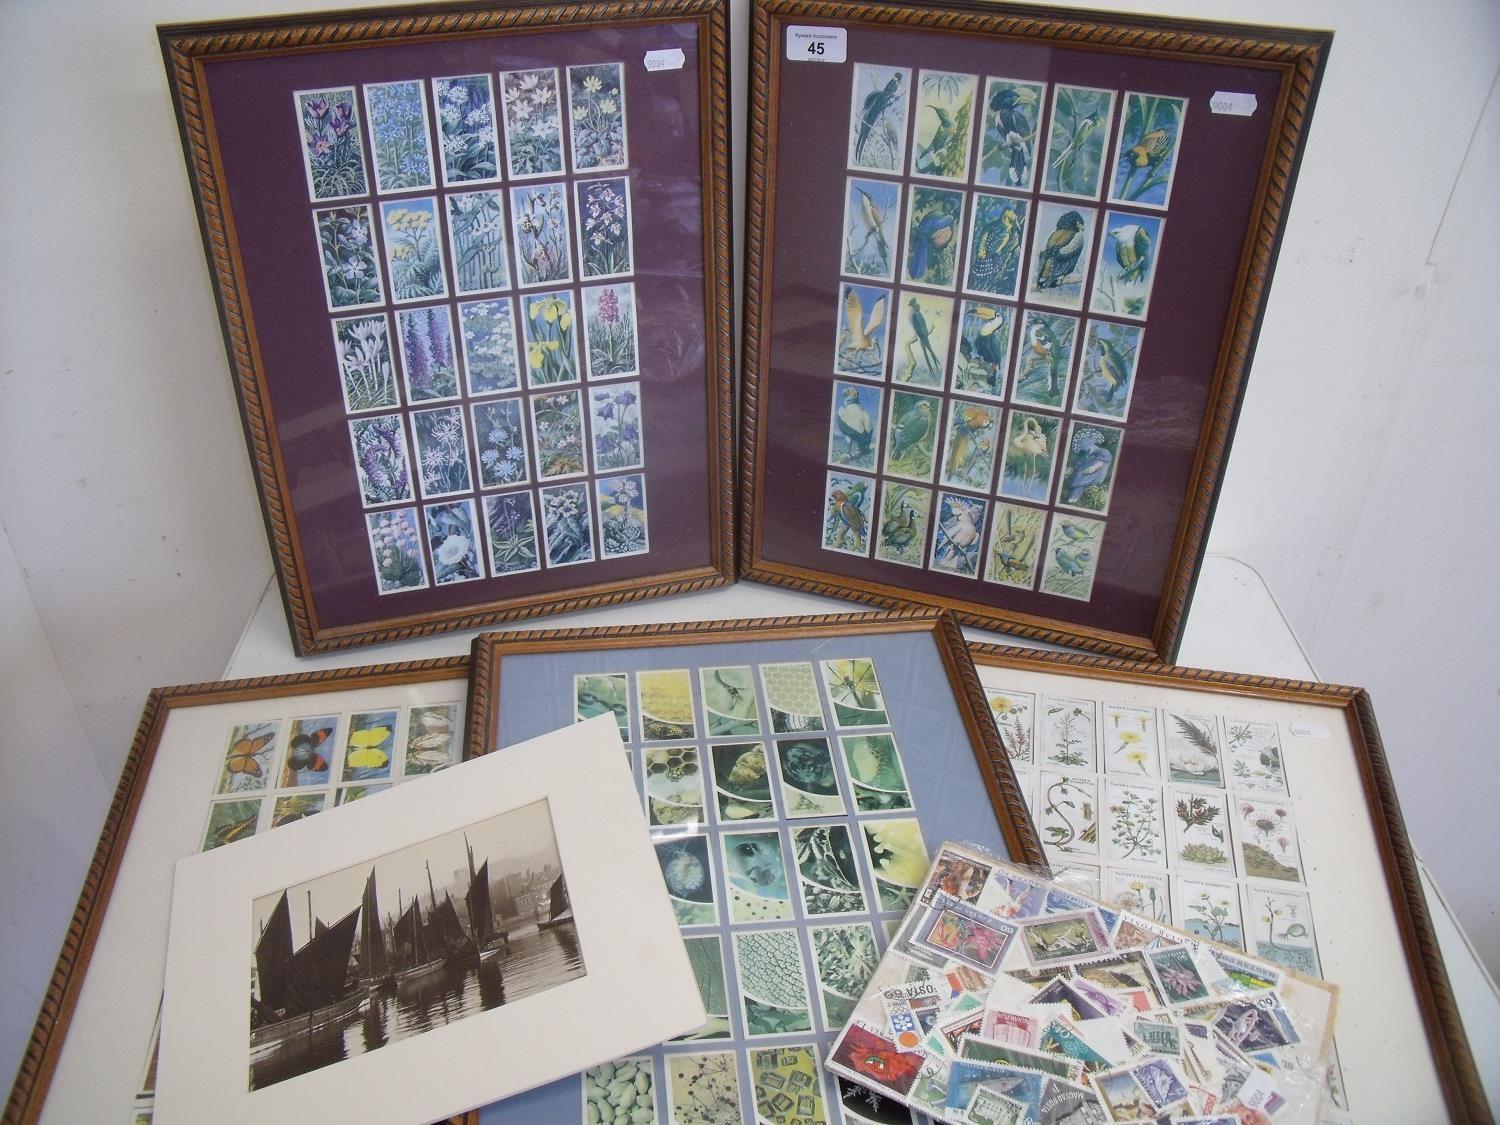 Set of five framed and mounted cigarette cards depicting birds, flowers, butterflies etc and a